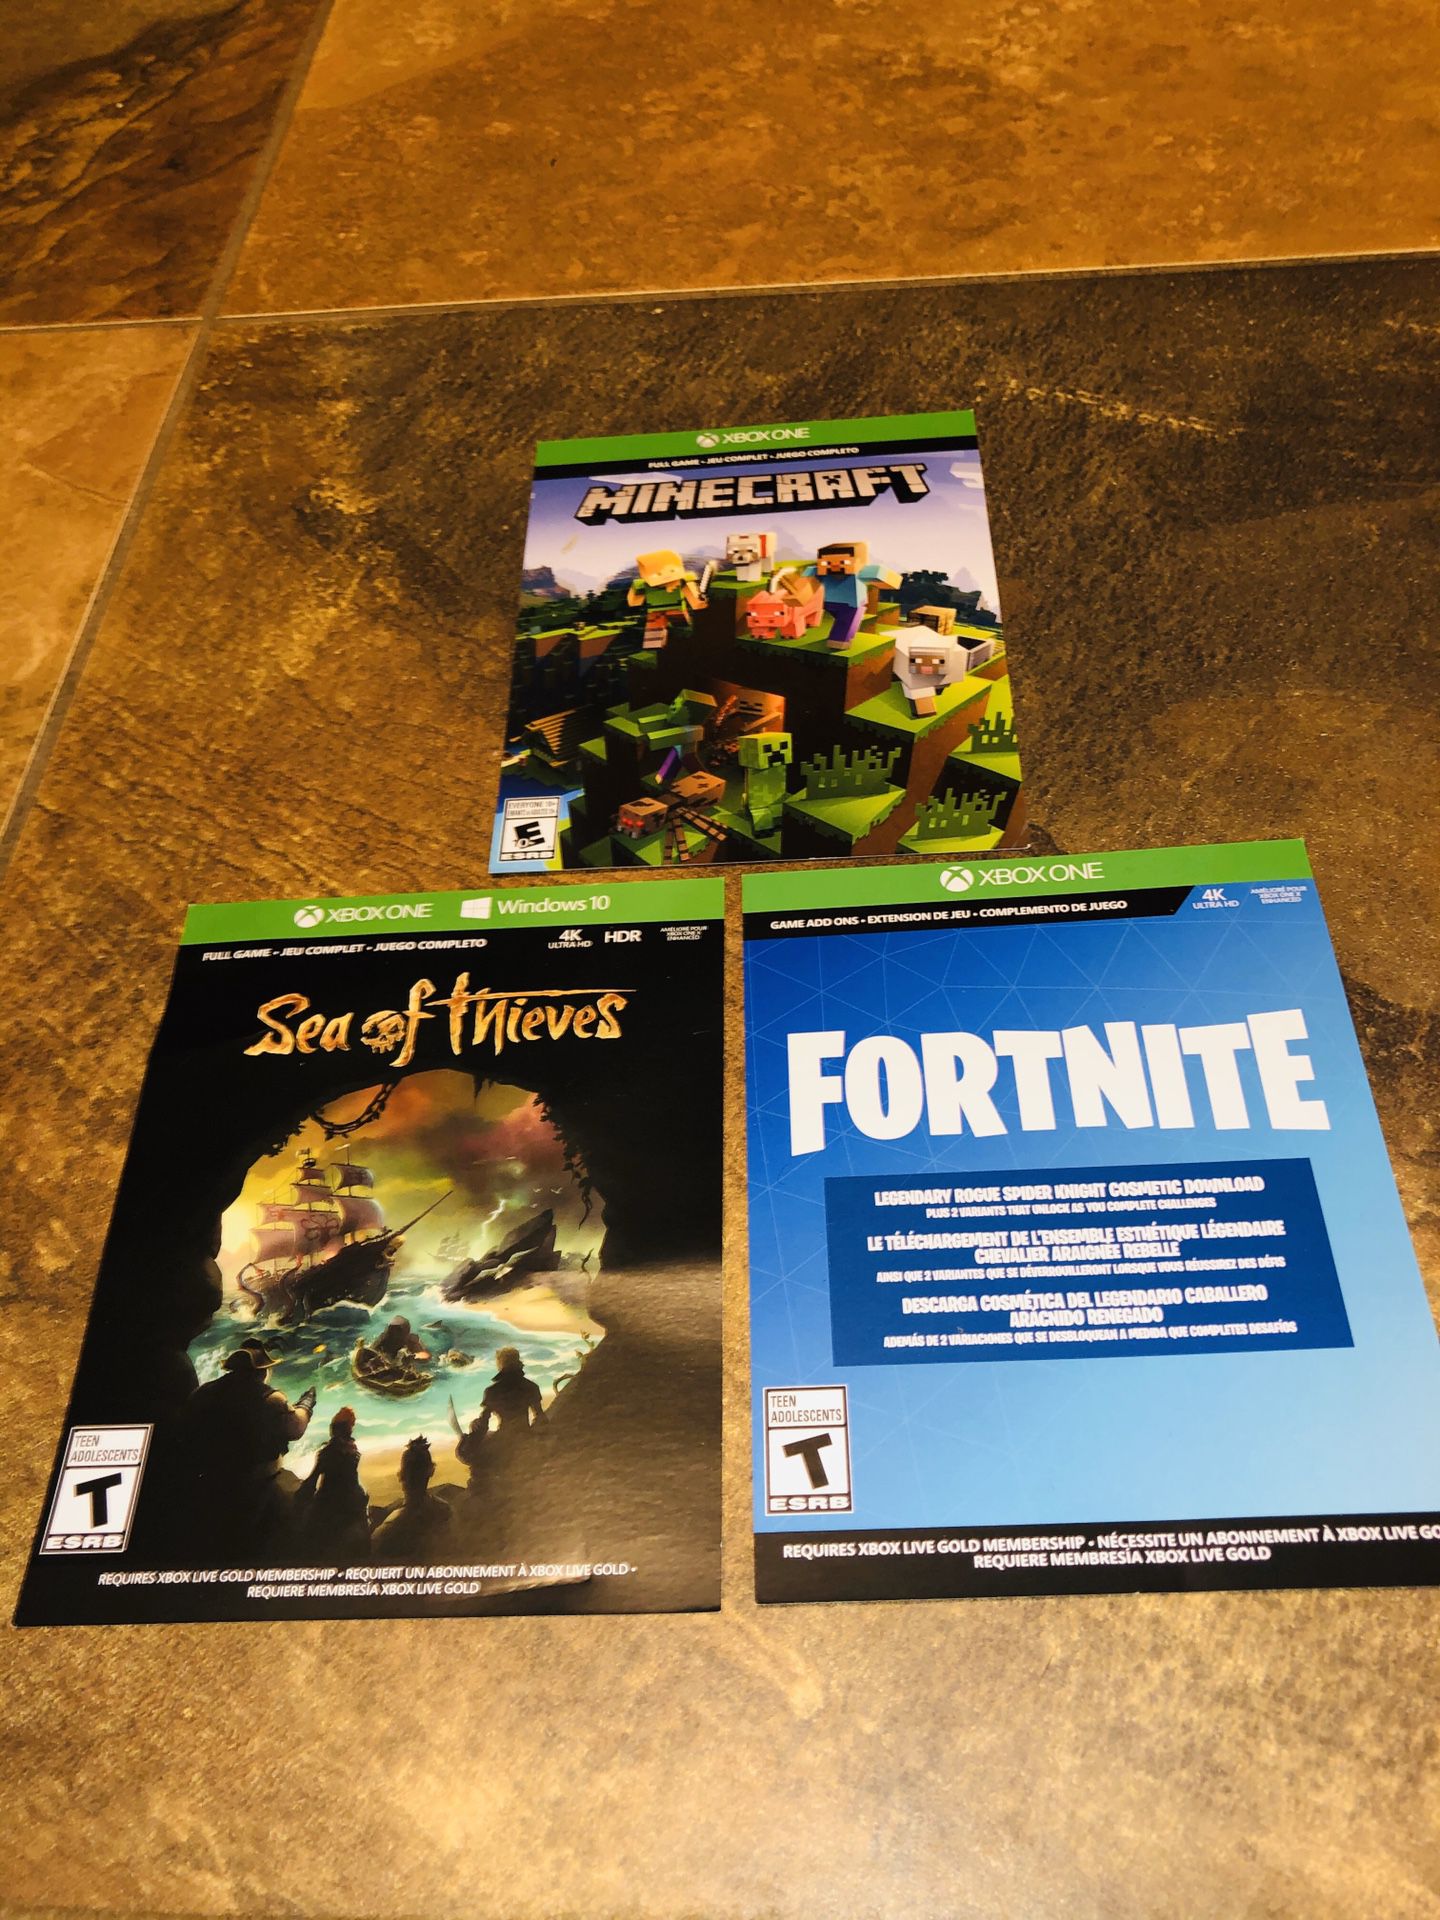 Mine craft, sea of thieves (Xbox one) games